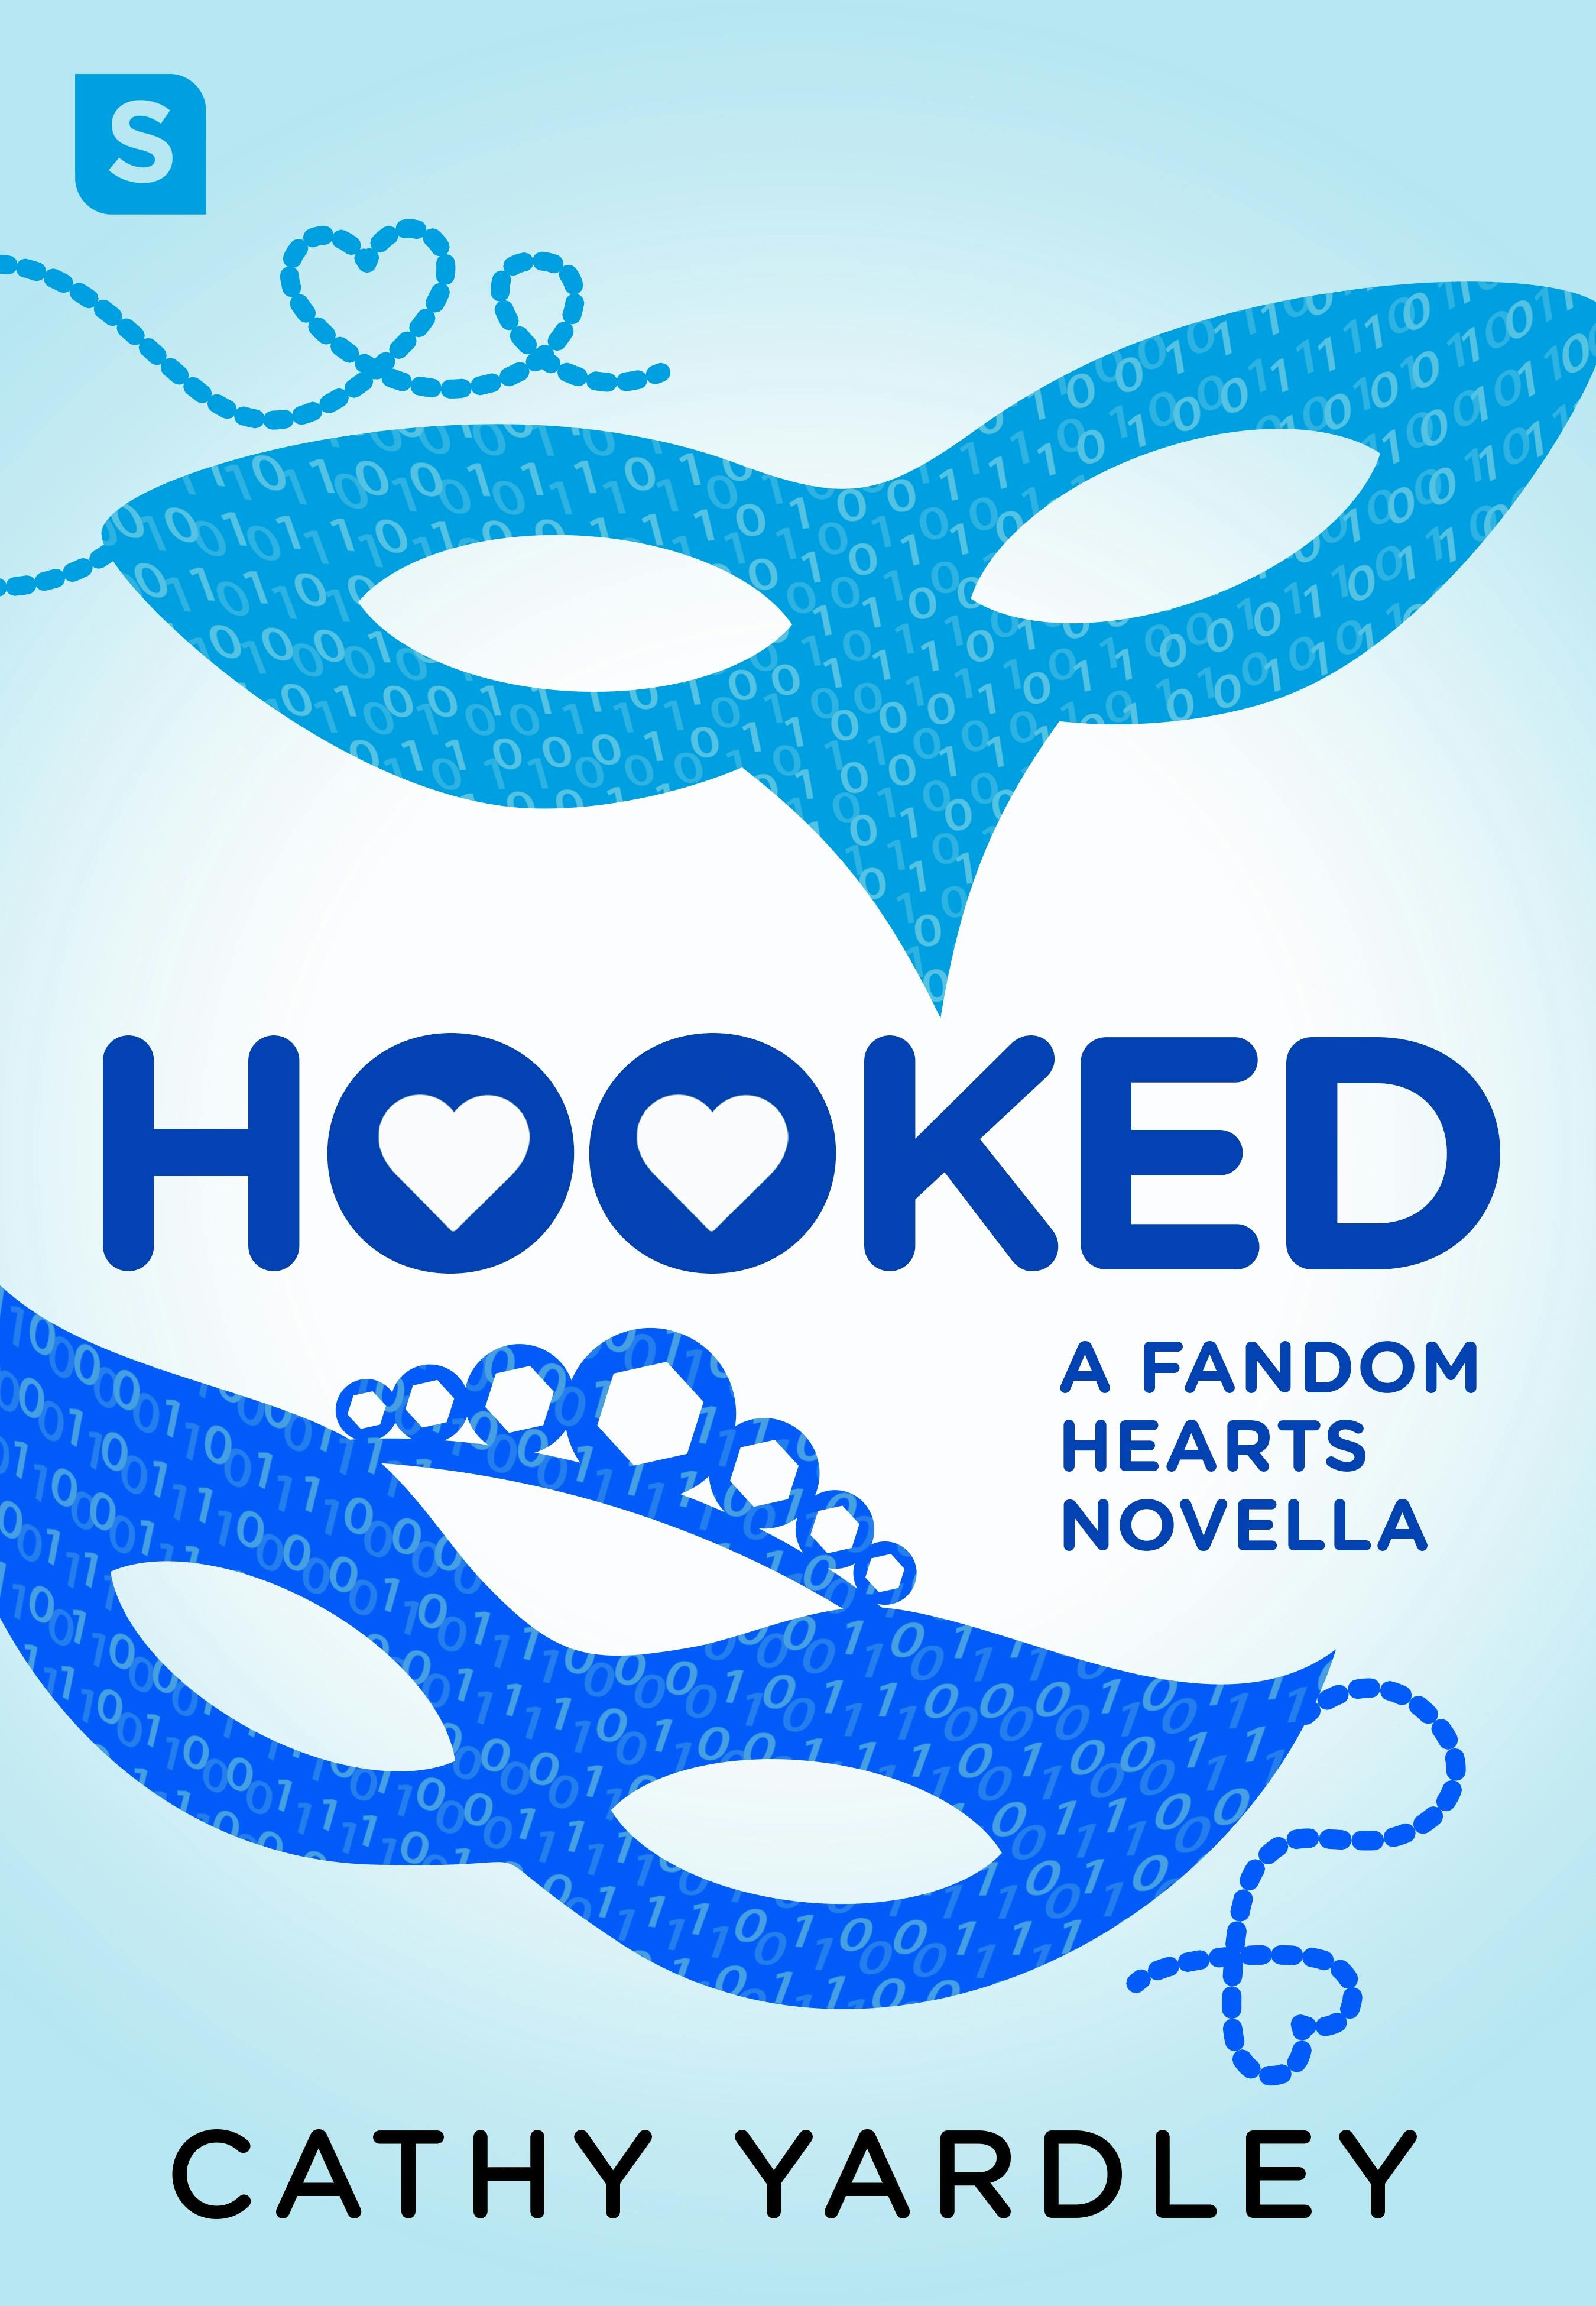 Image of Hooked